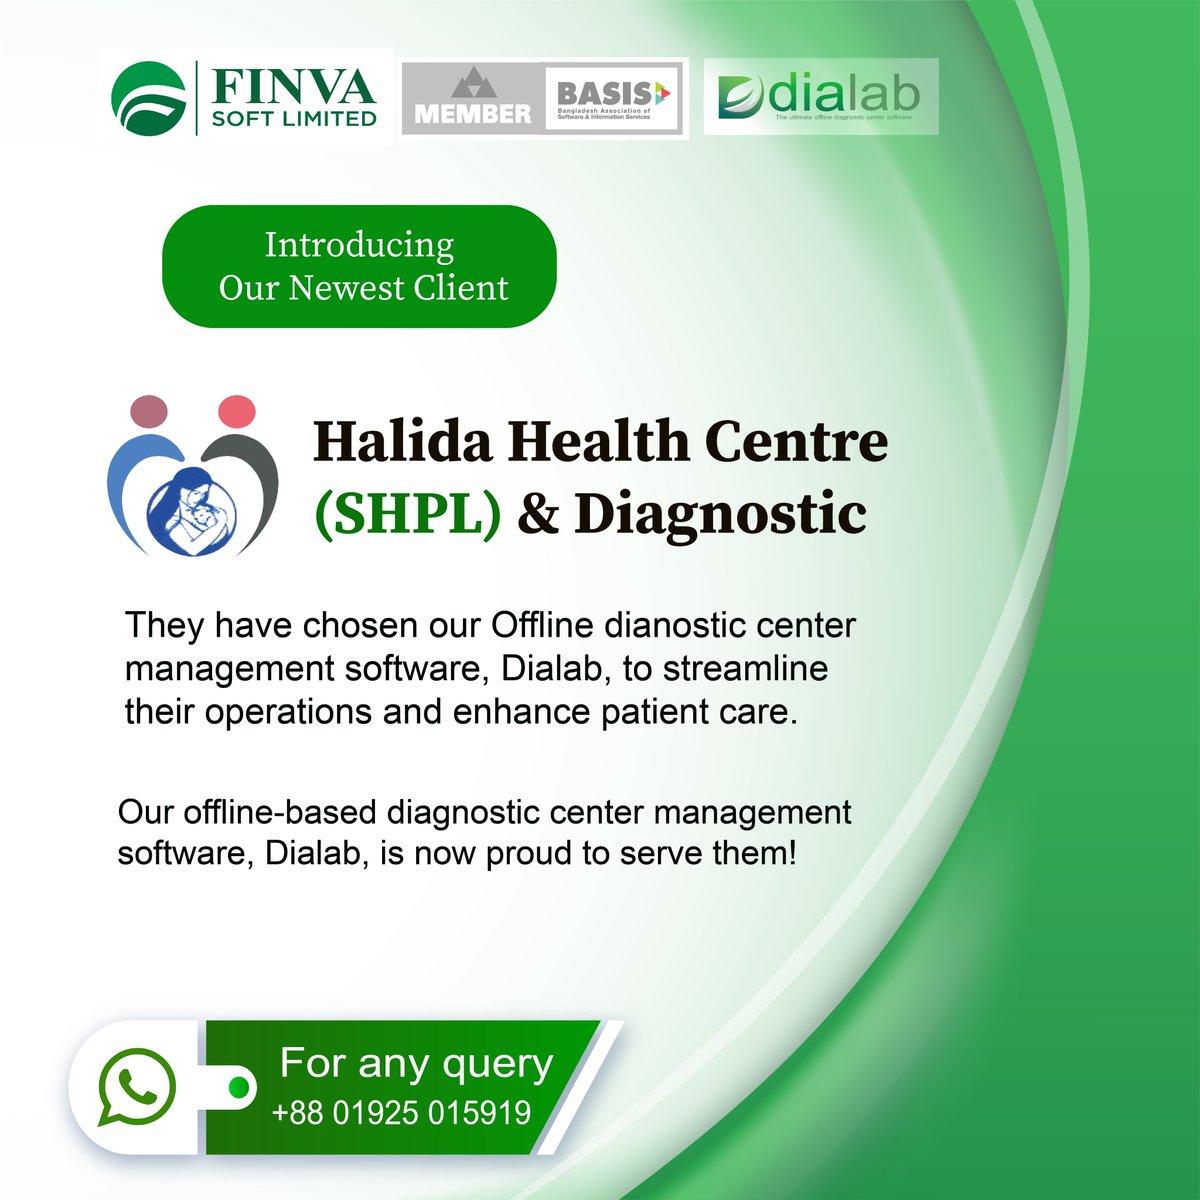 We are delighted to welcome Halida Health Centre (SHPL) & Diagnostic to our ever-expanding family of clients! 👨‍⚕️👨‍⚕️

#FinvaSoft #MemberOfBasis #SoftwareCompany #Dialab #DiagnosticCenterManagement #HealthcareSoftware #HalidaHealthCentre #MedicalManagement